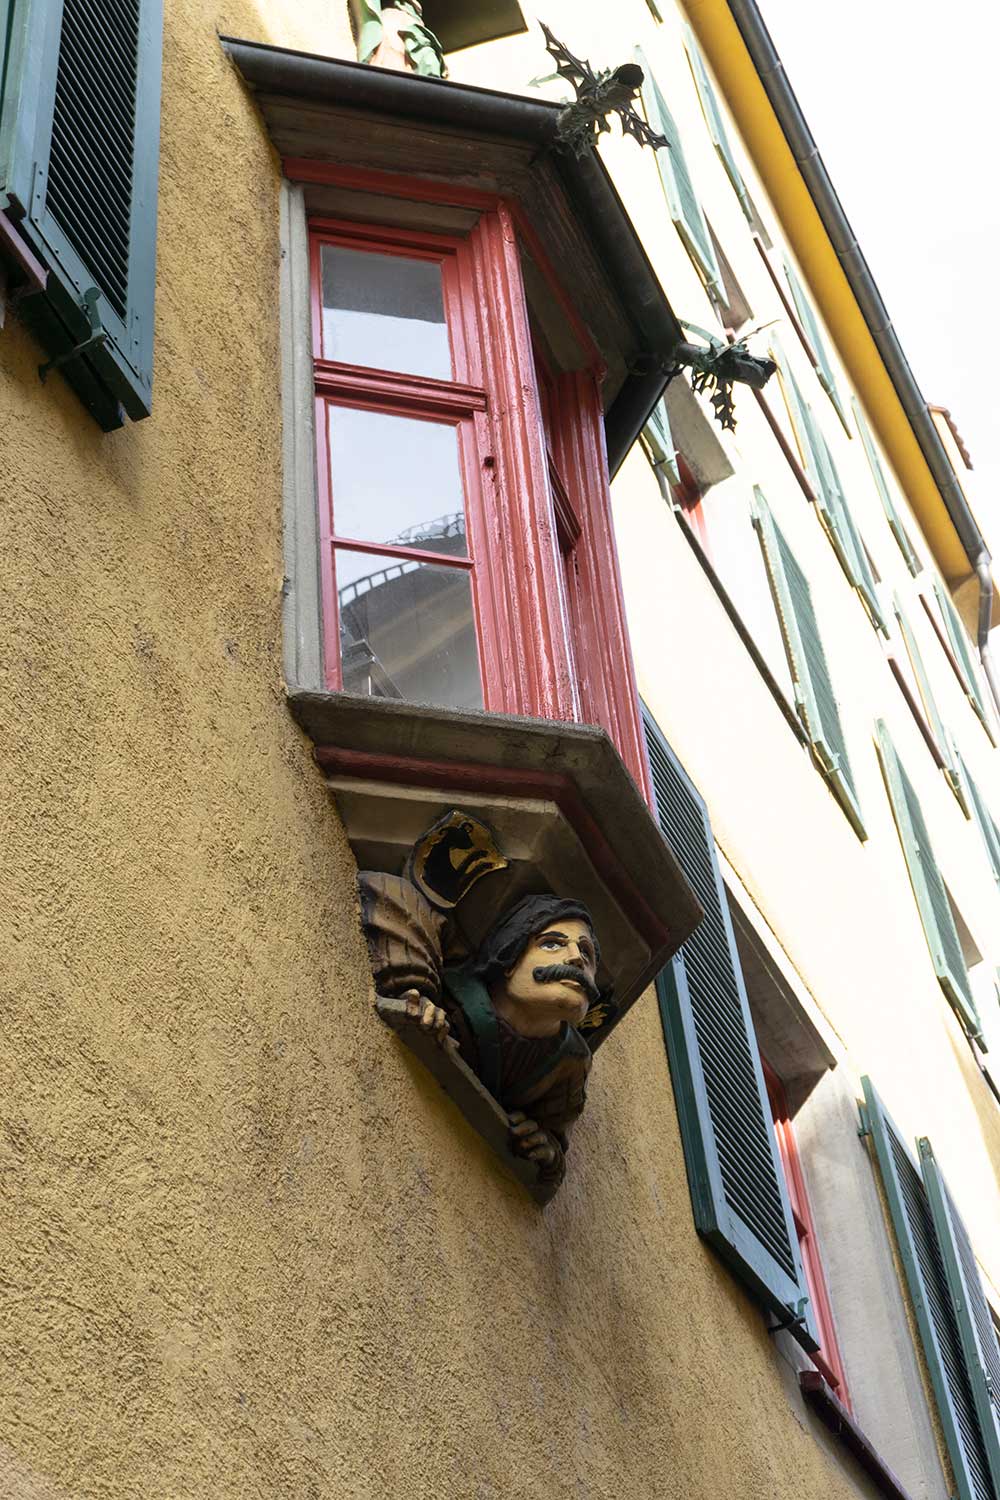 A carved face looks out at the streets from below a window in Konstanz, Germany.